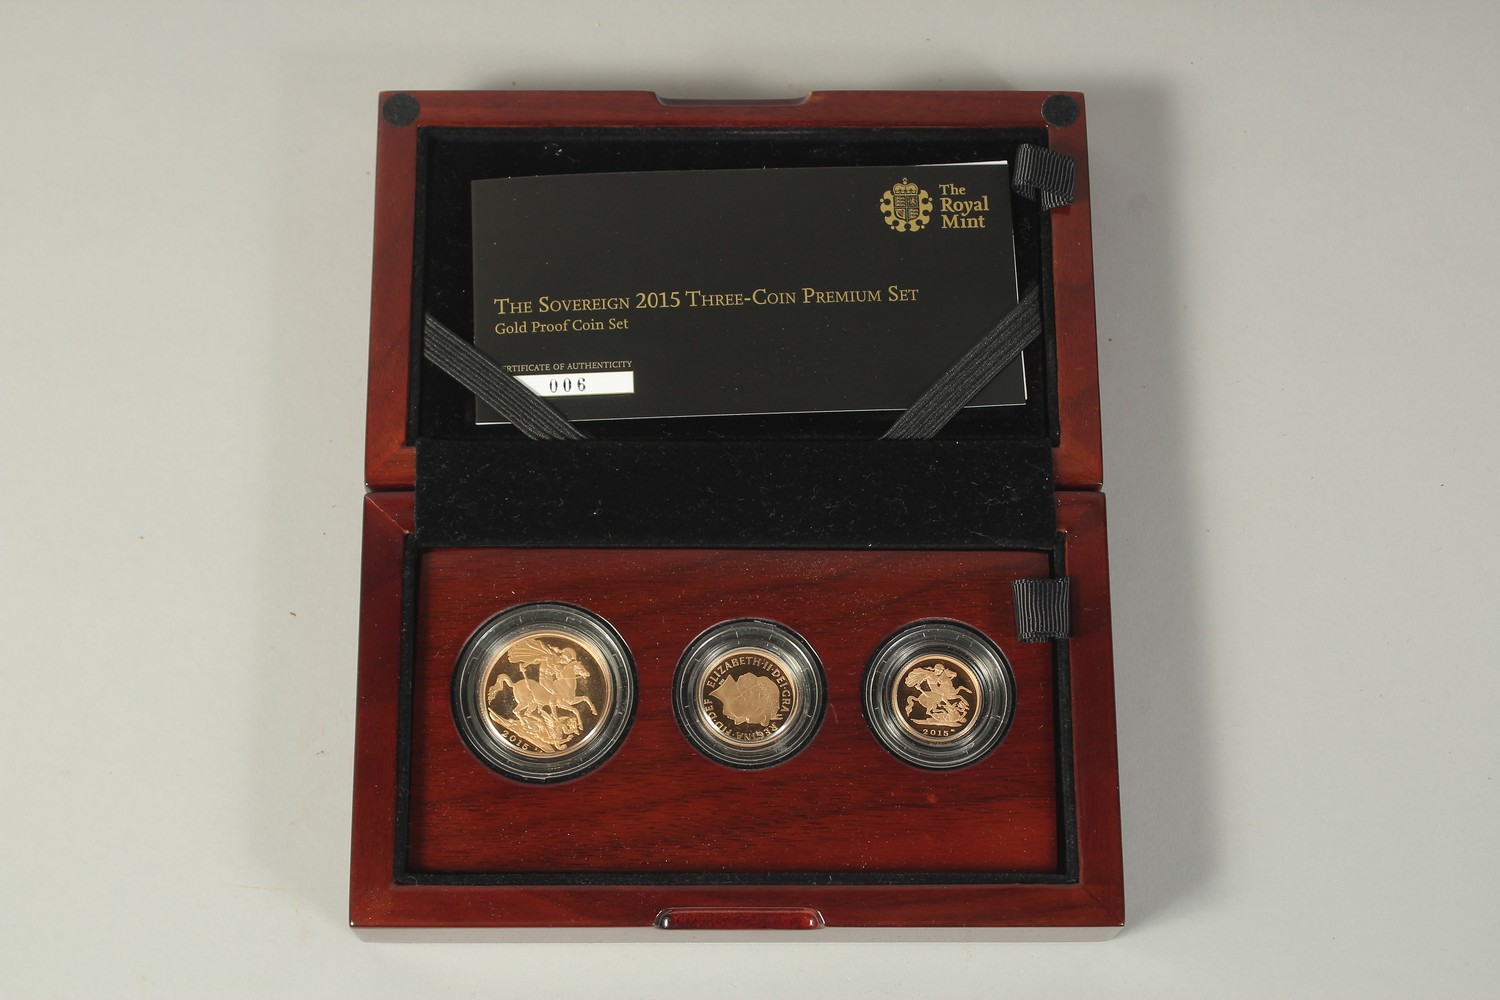 THE ROYAL MINT. THE SOVEREIGN 2015 THREE COIN, PREMIUM GOLD PROOF COIN SET. No. 006. Double